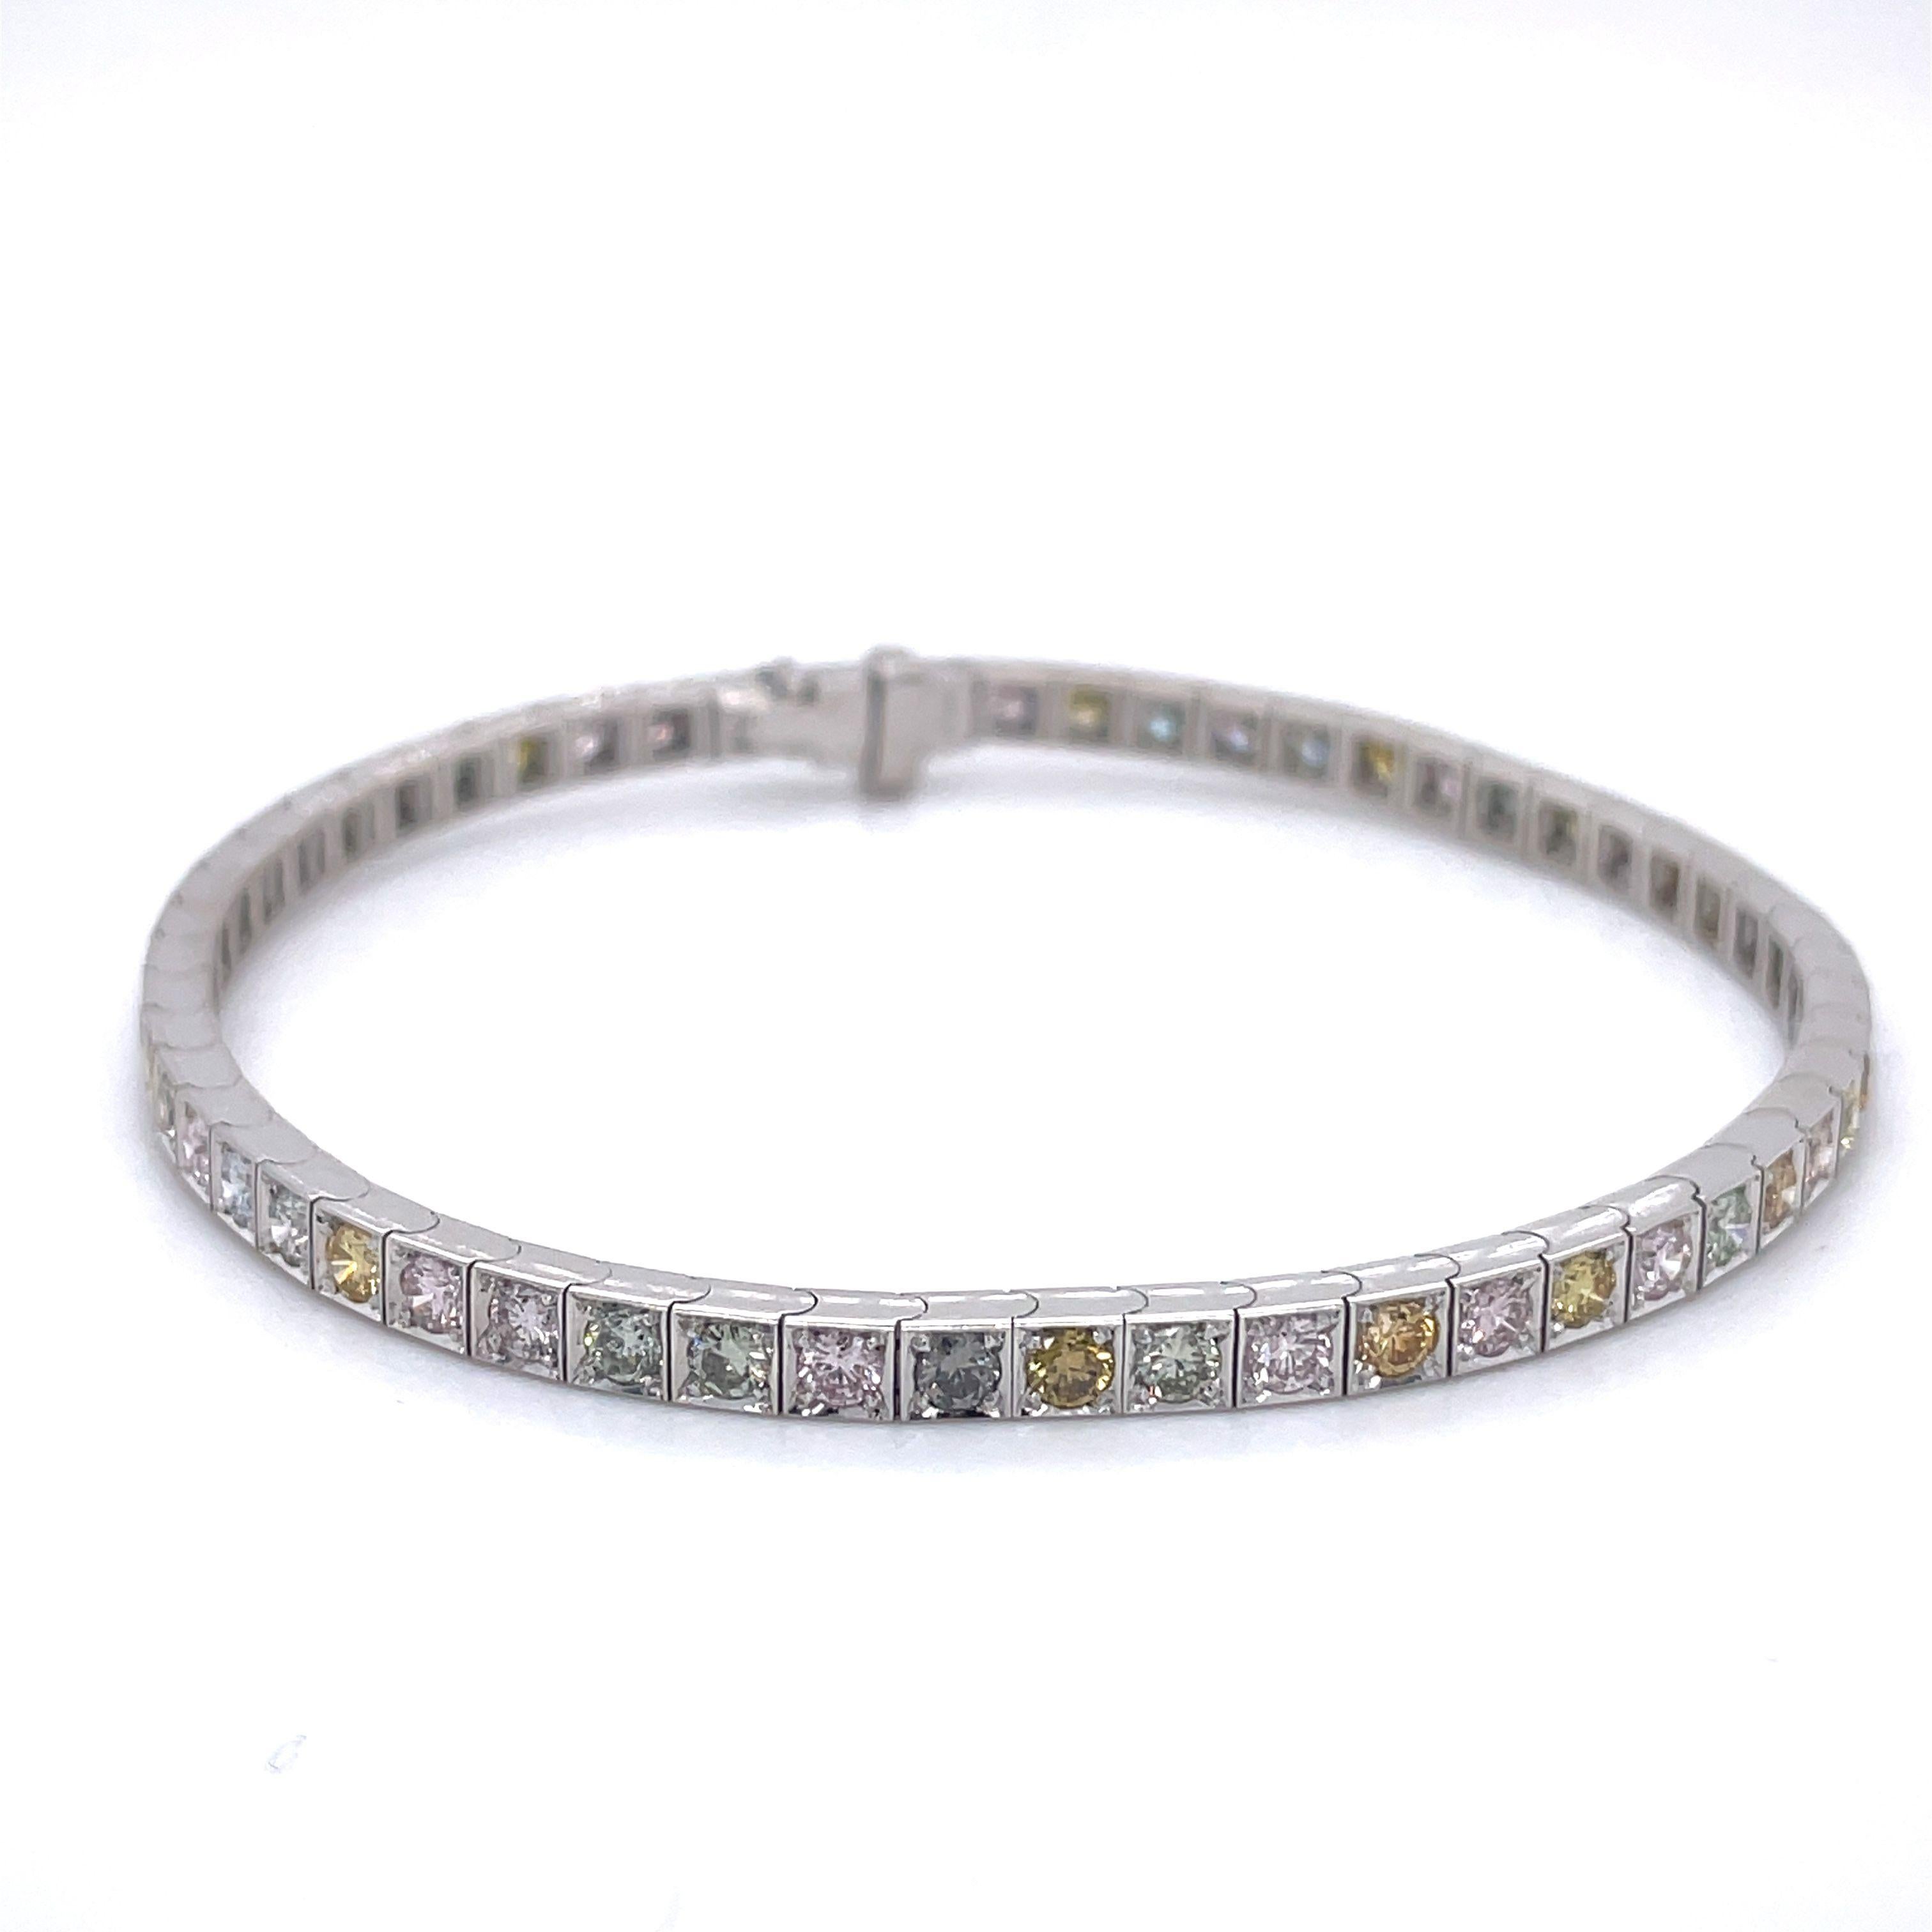  3.24CT Multi color Diamonds Tennis Bracelet, 18K white gold, AIG Certificated

Jewelry Material: White Gold 18k (the gold has been tested by a professional)

Total Carat Weight: 3.24ct (Approx.)

Total Metal Weight: 11.52g

Size:  17.80 cm